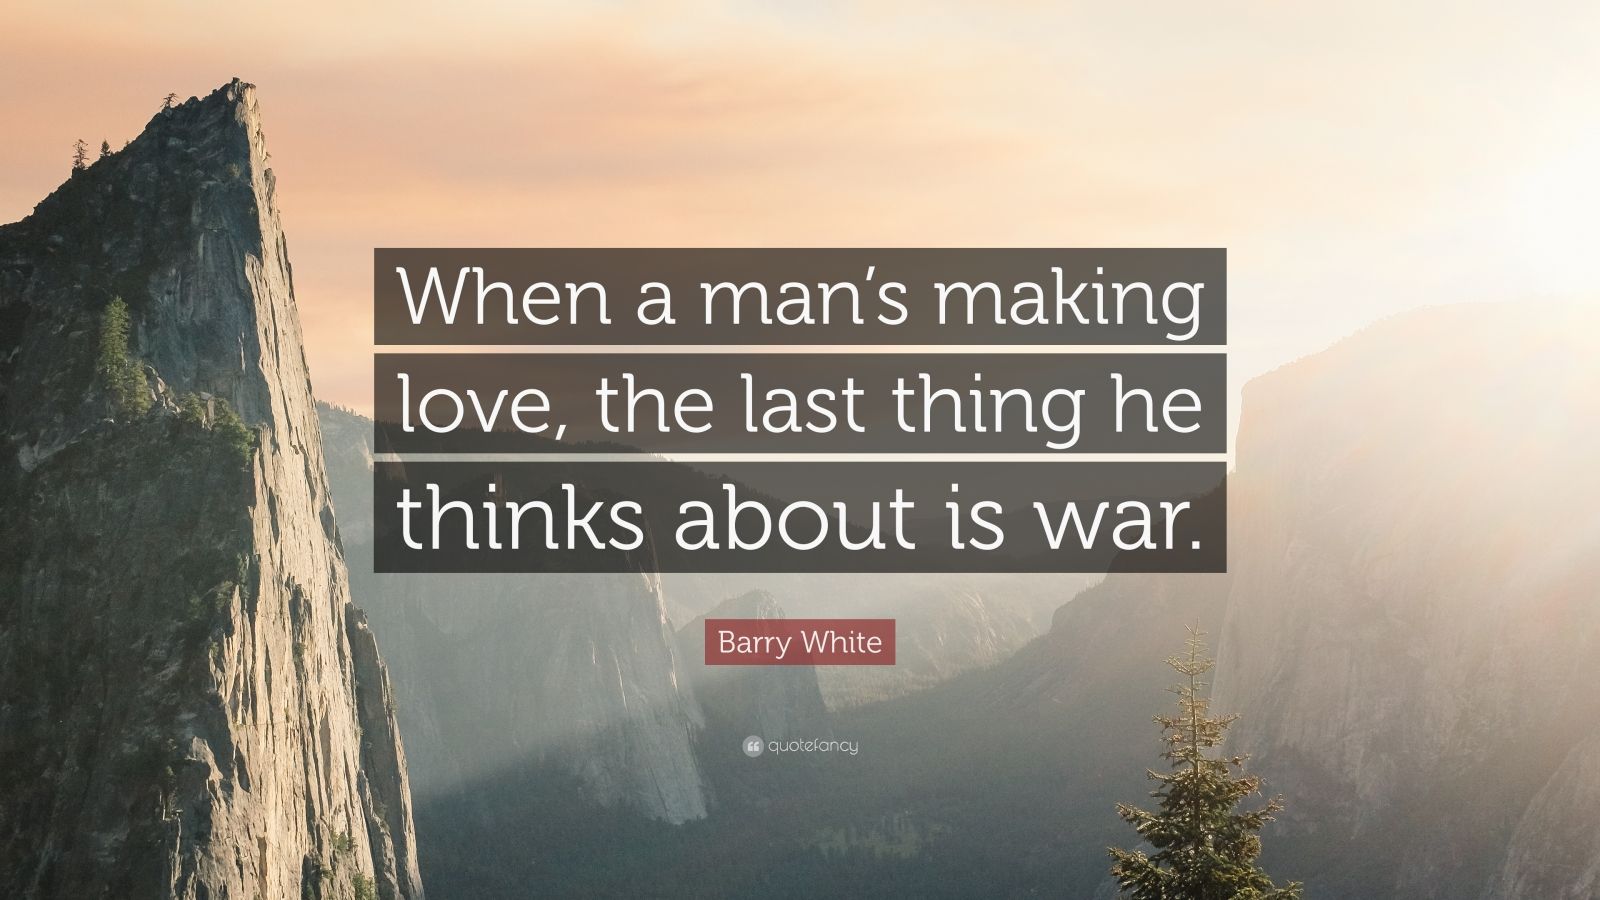 Barry White Quote: "When a man's making love, the last ...